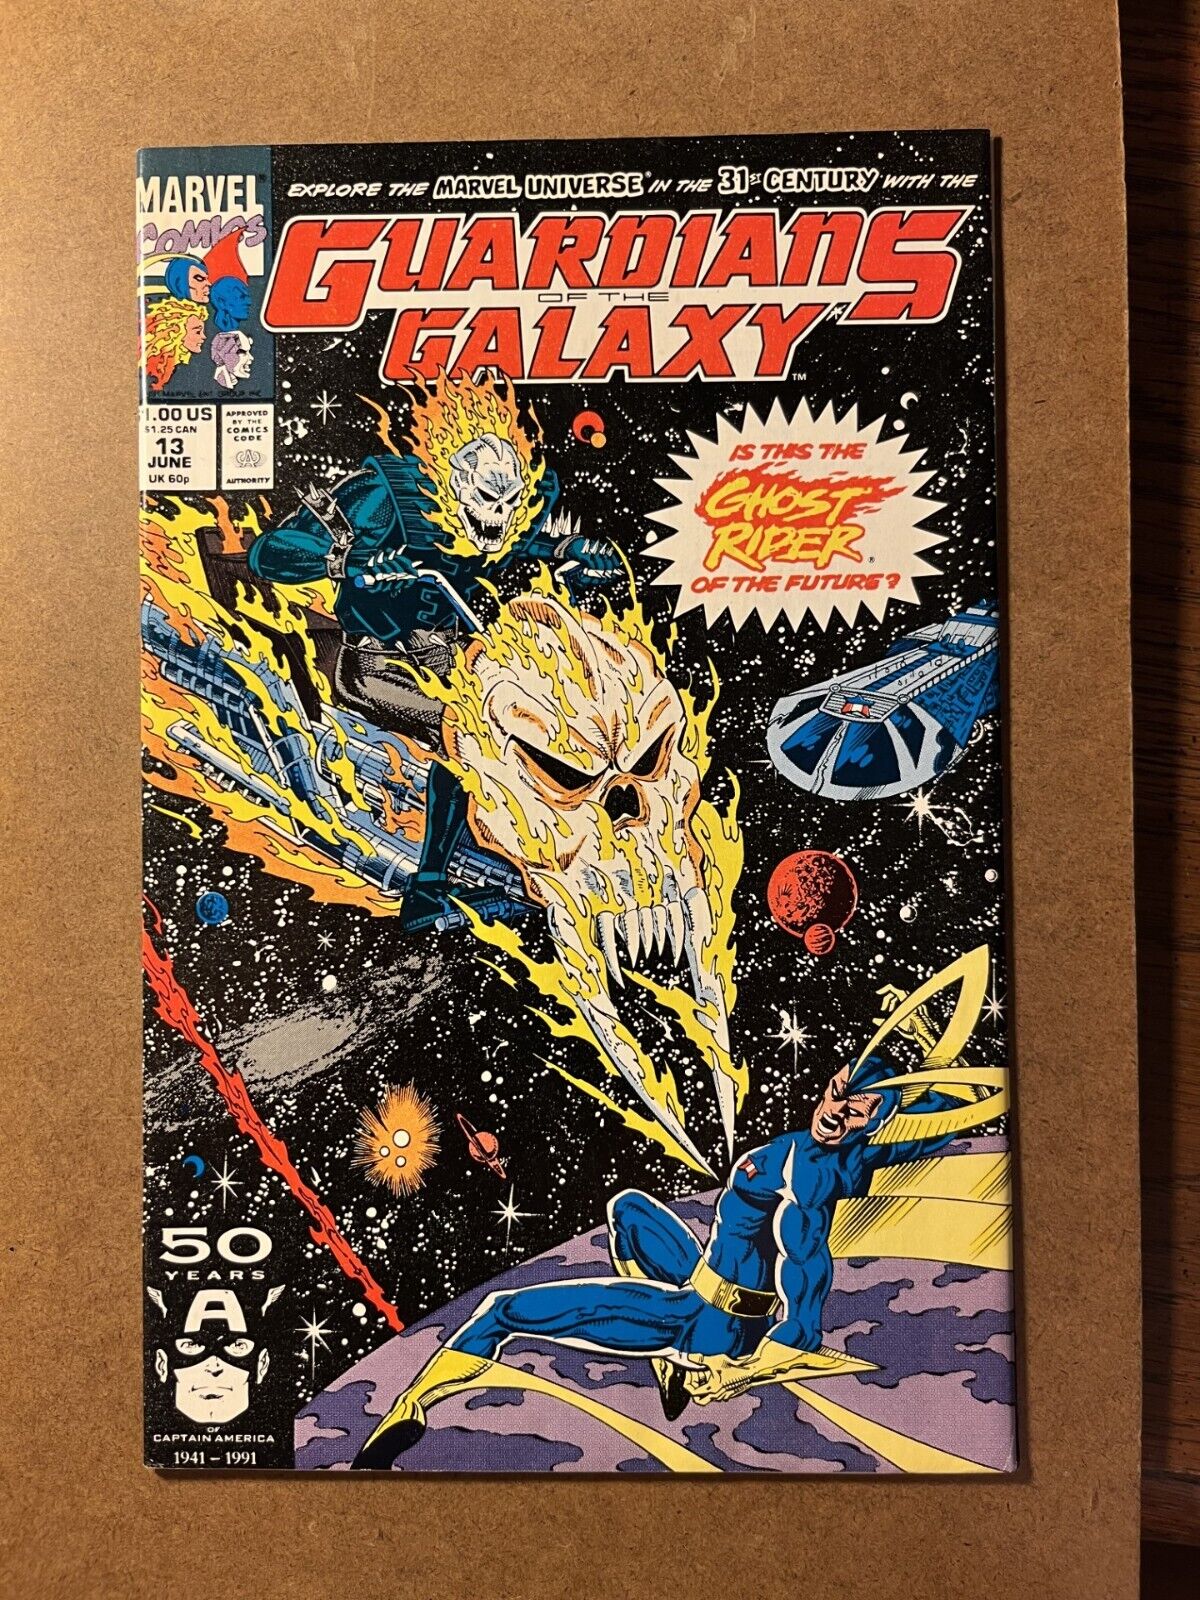 GUARDIANS OF THE GALAXY # 13   NM/M  9.2  NOT CGC RATED  1991  MODERN  AGE